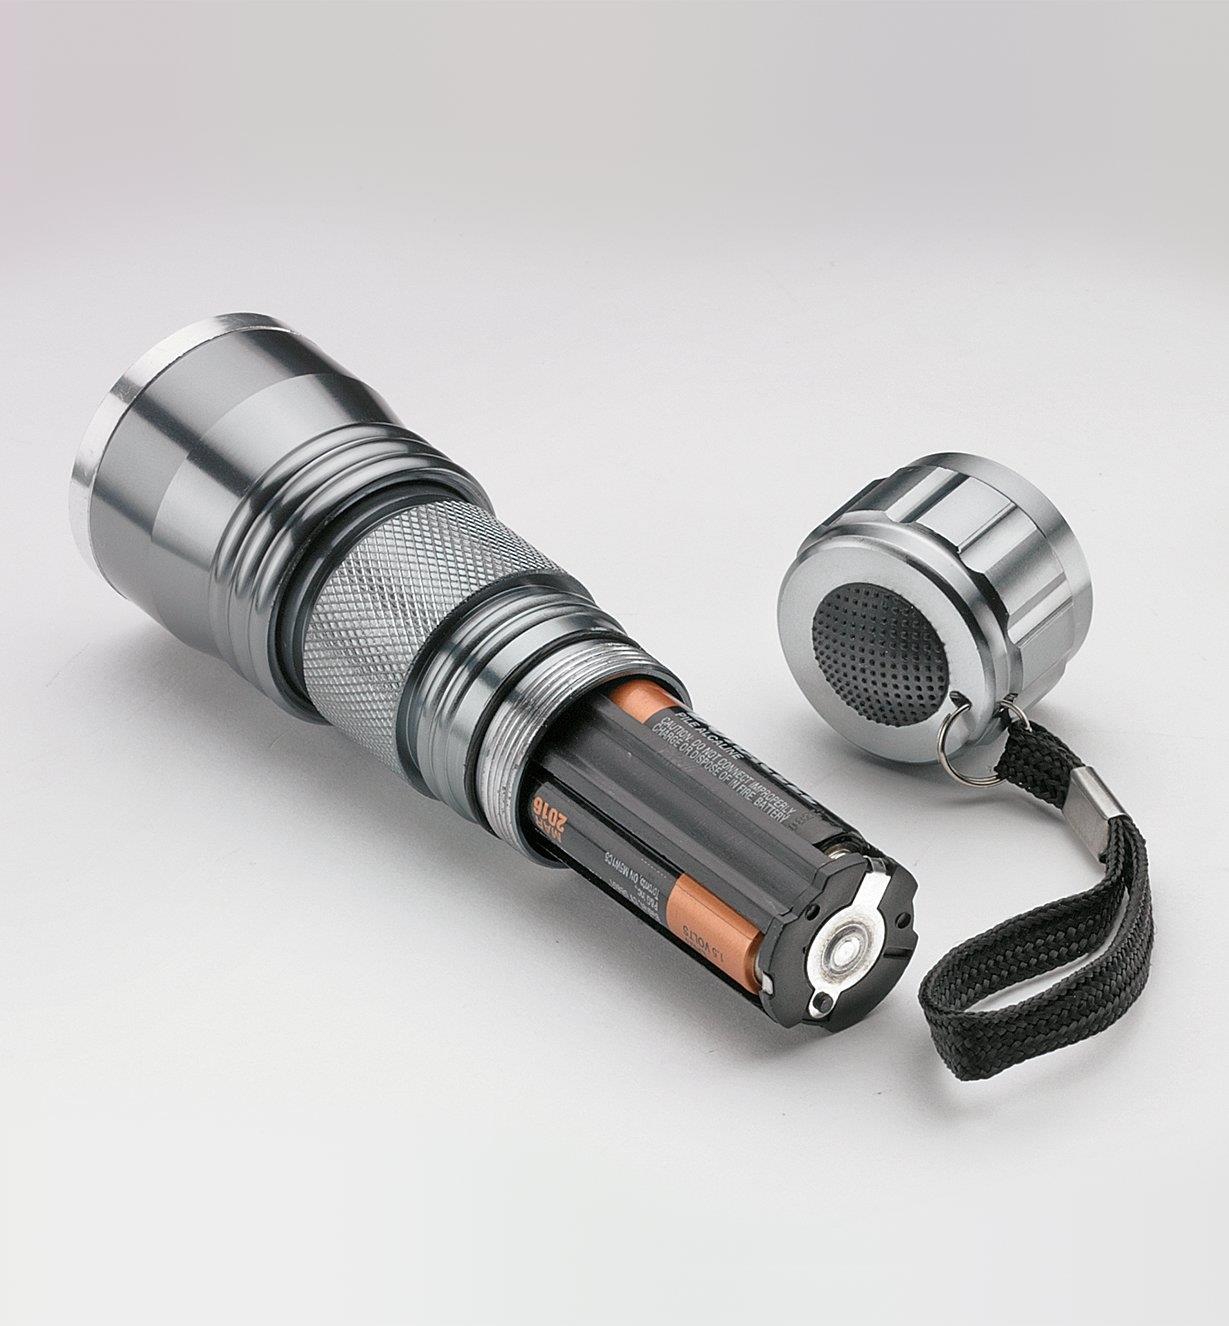 21-LED Flashlight with battery compartment removed to show three AAA batteries